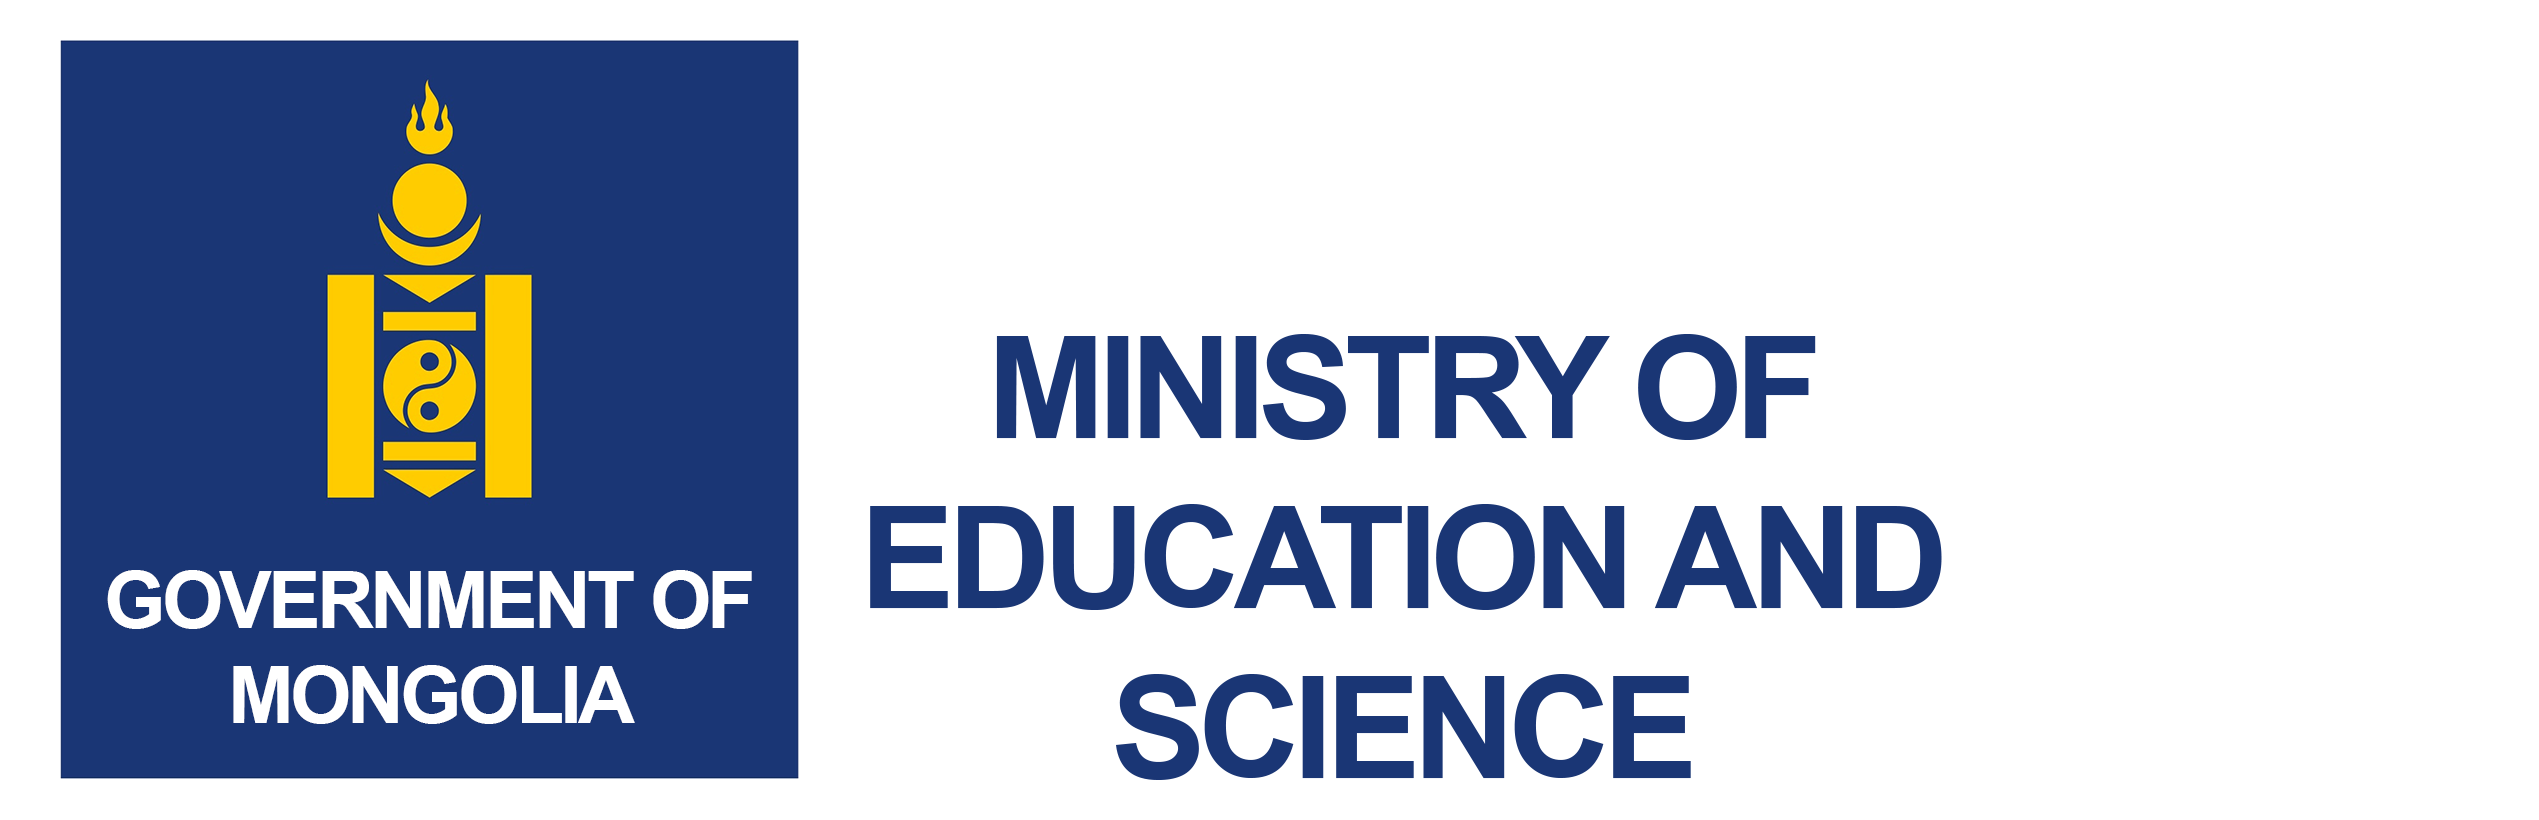 ministry of education and science